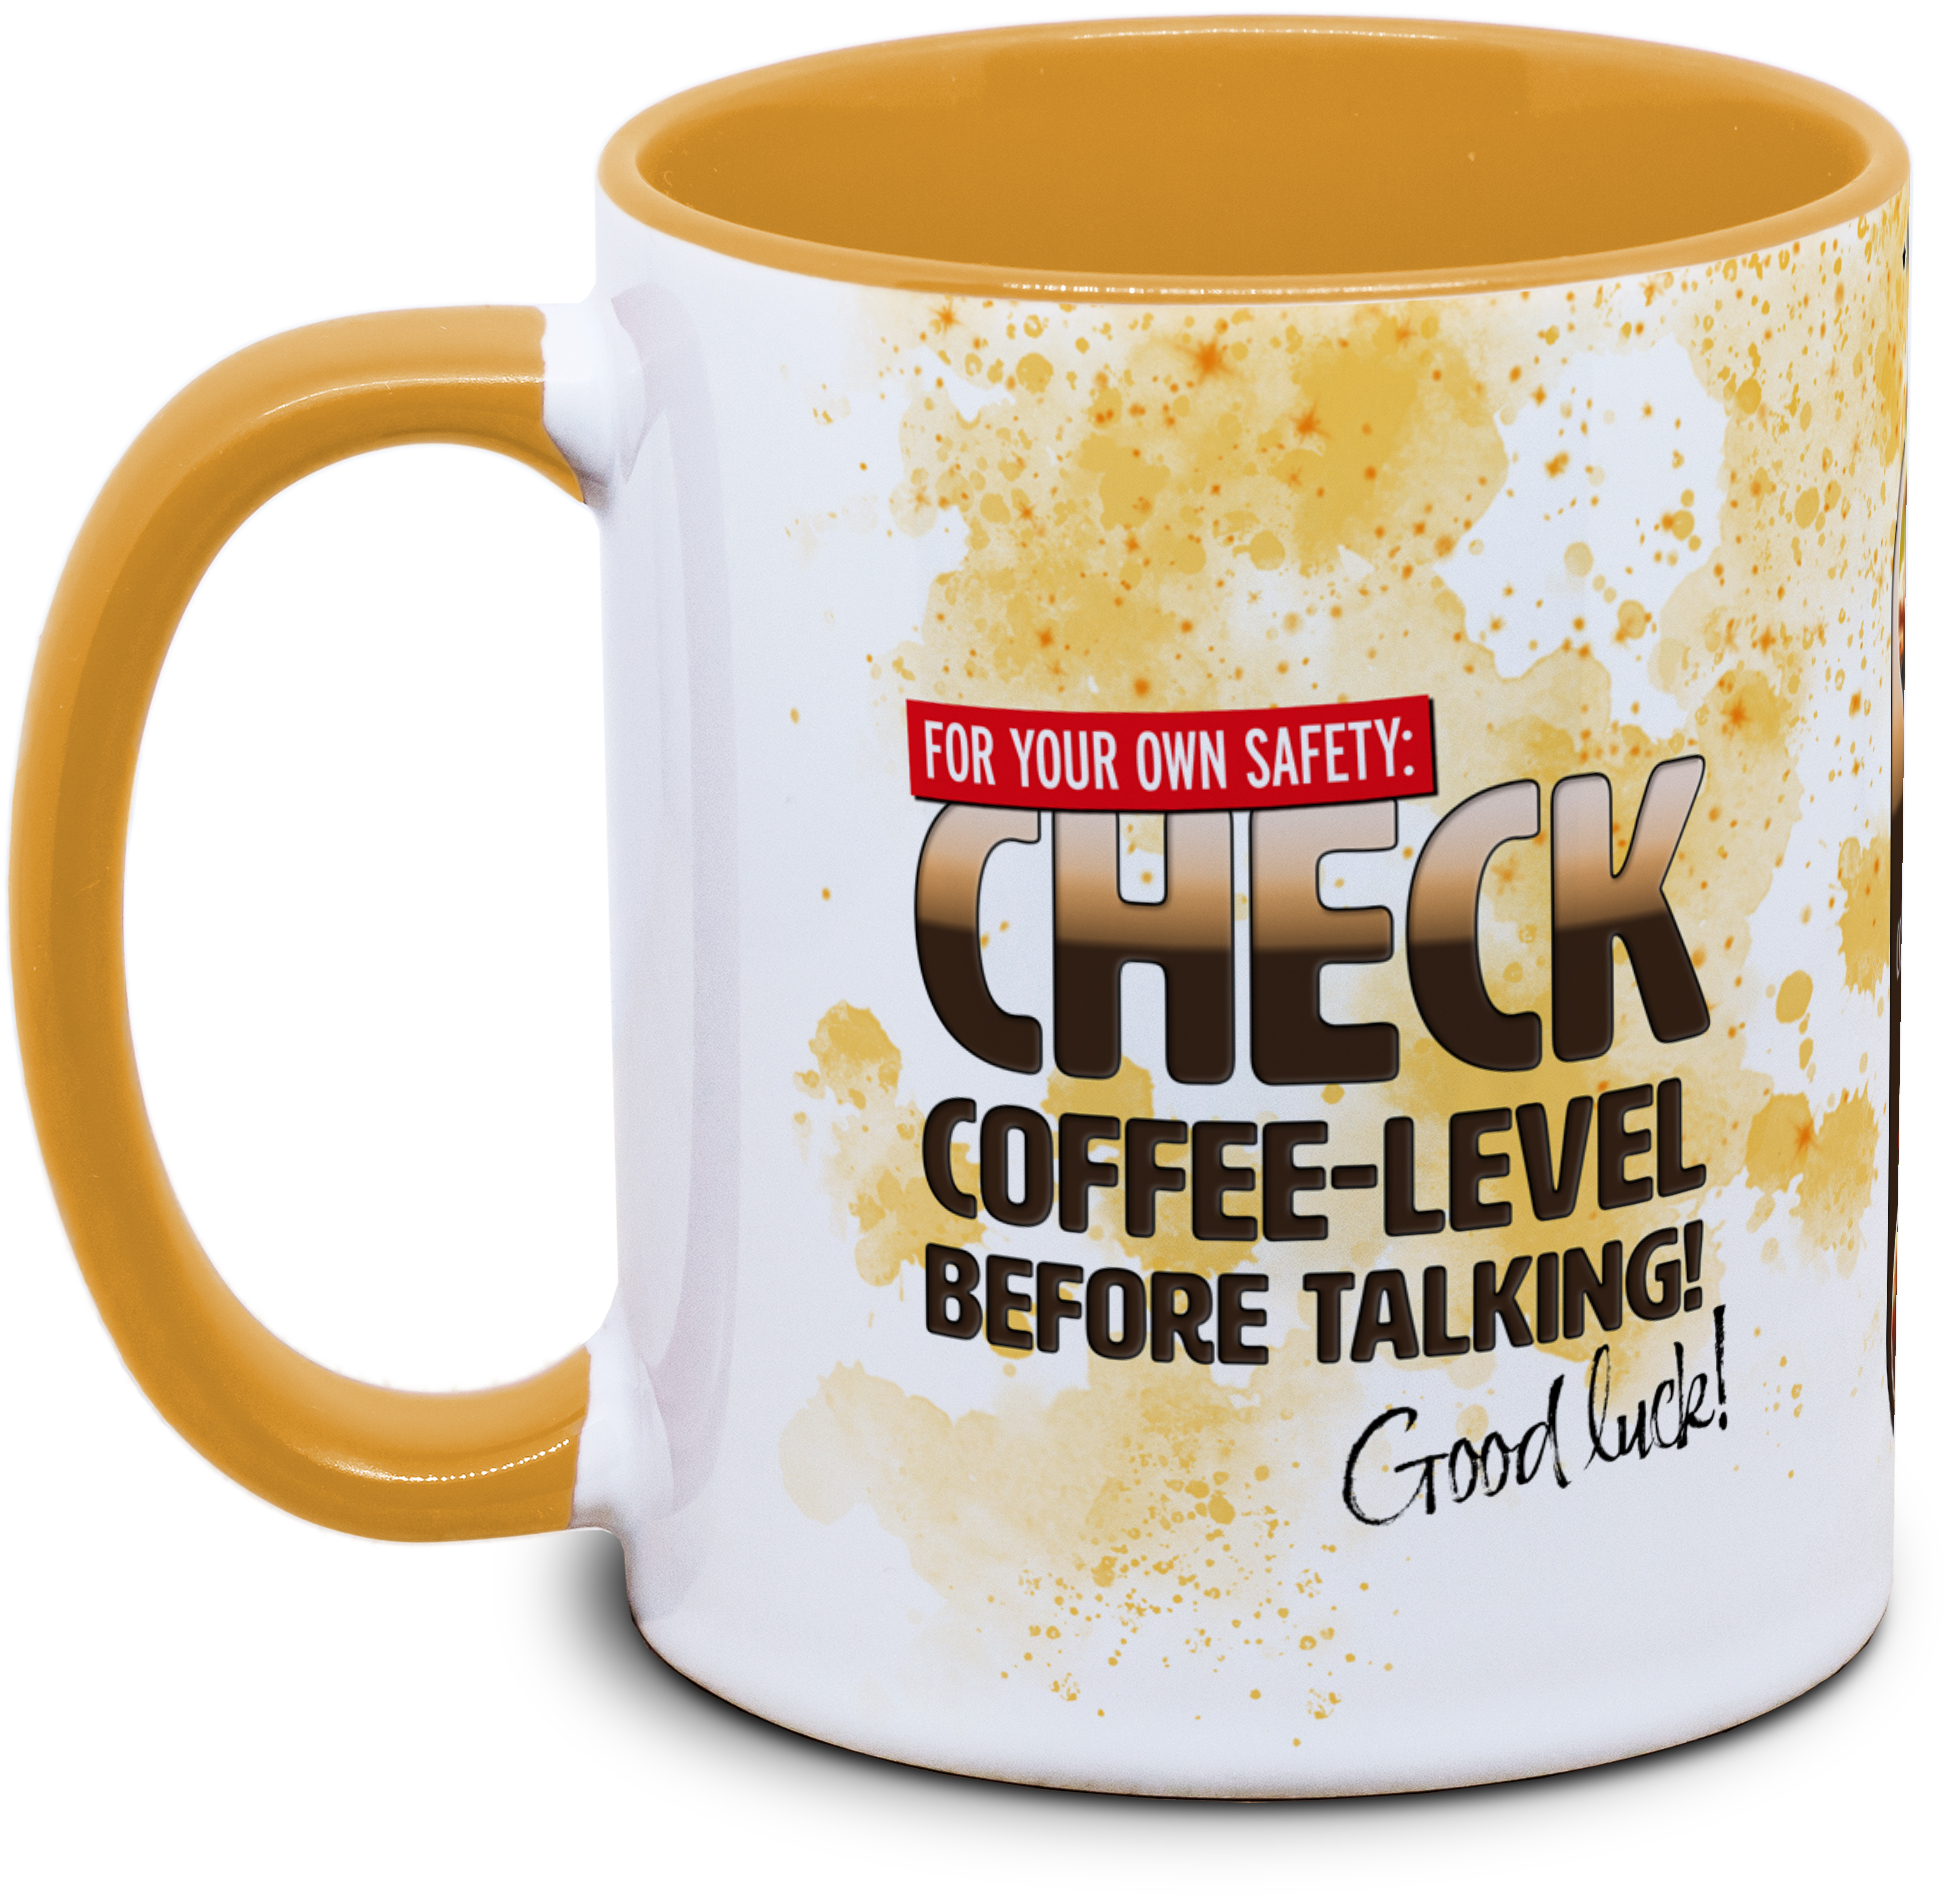 Check Coffee Level before talking!